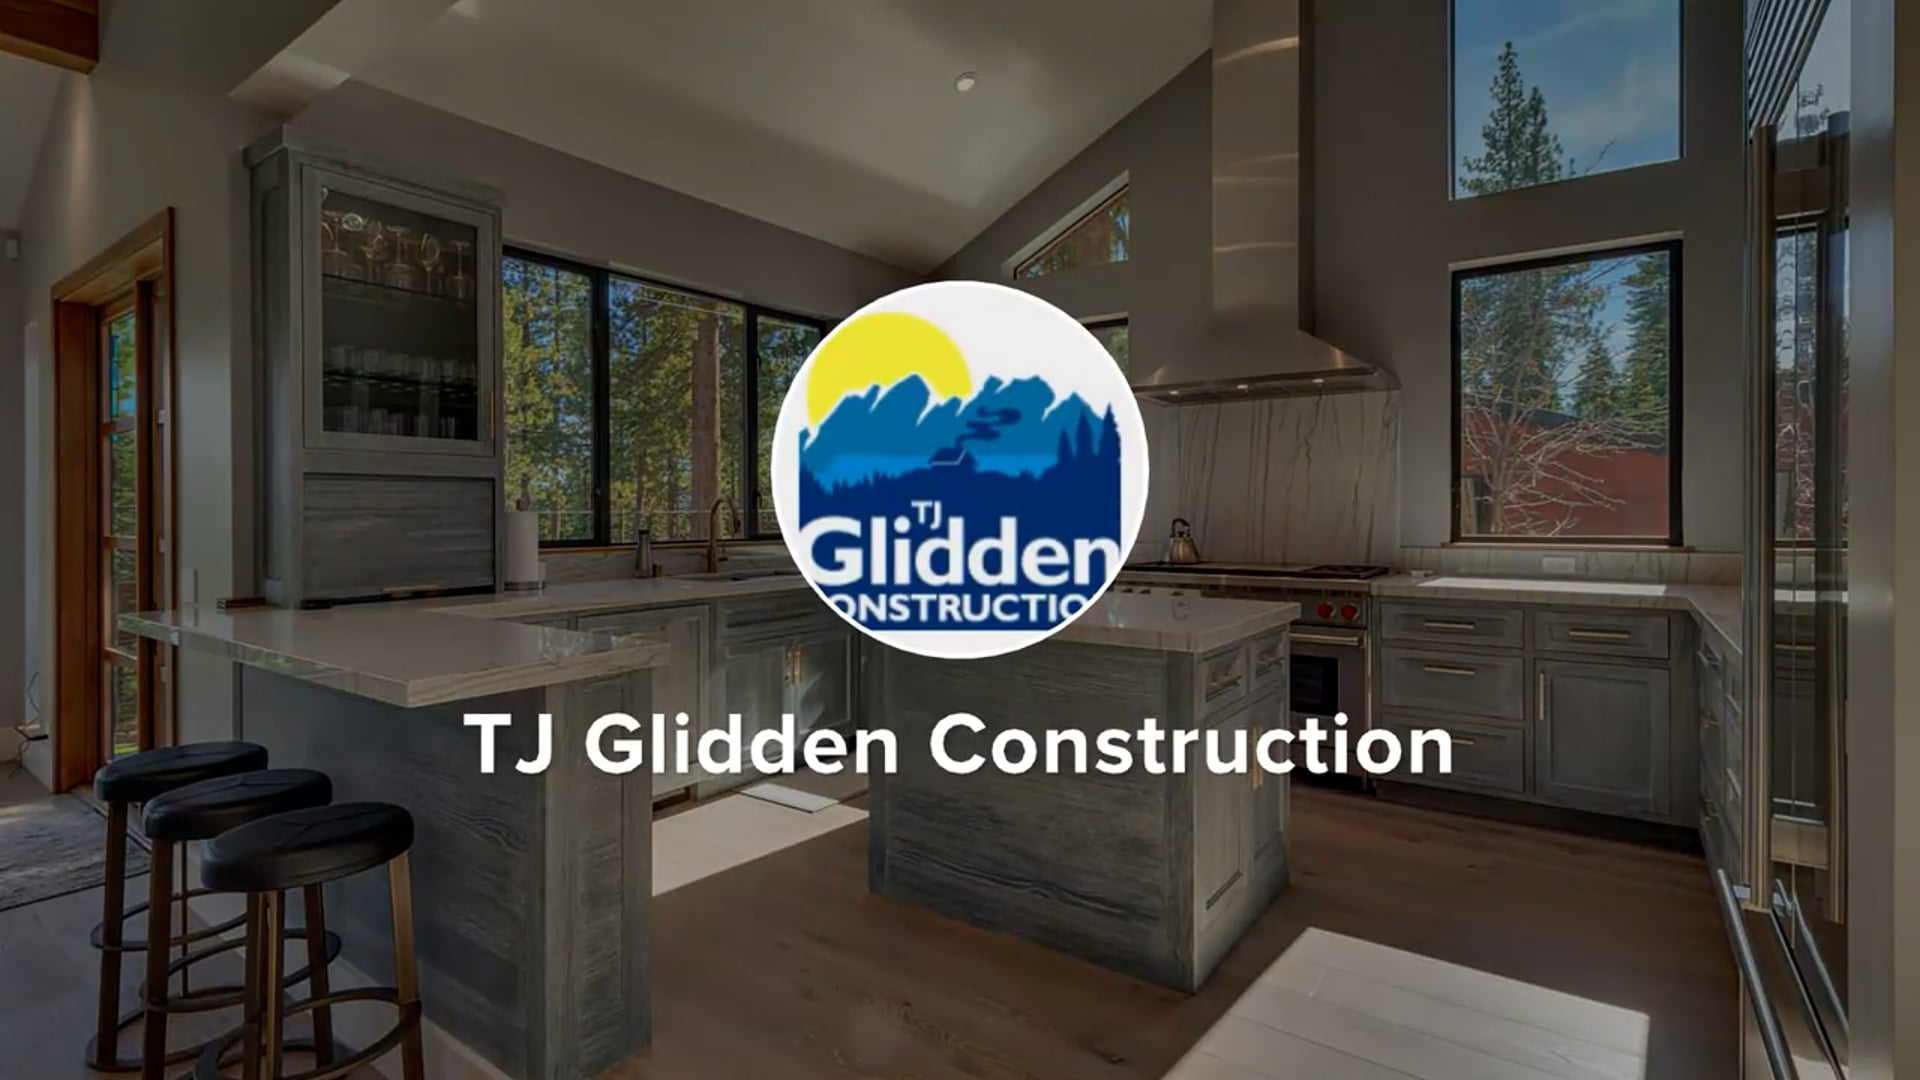 Home Builders in Reno - Kirby Construction